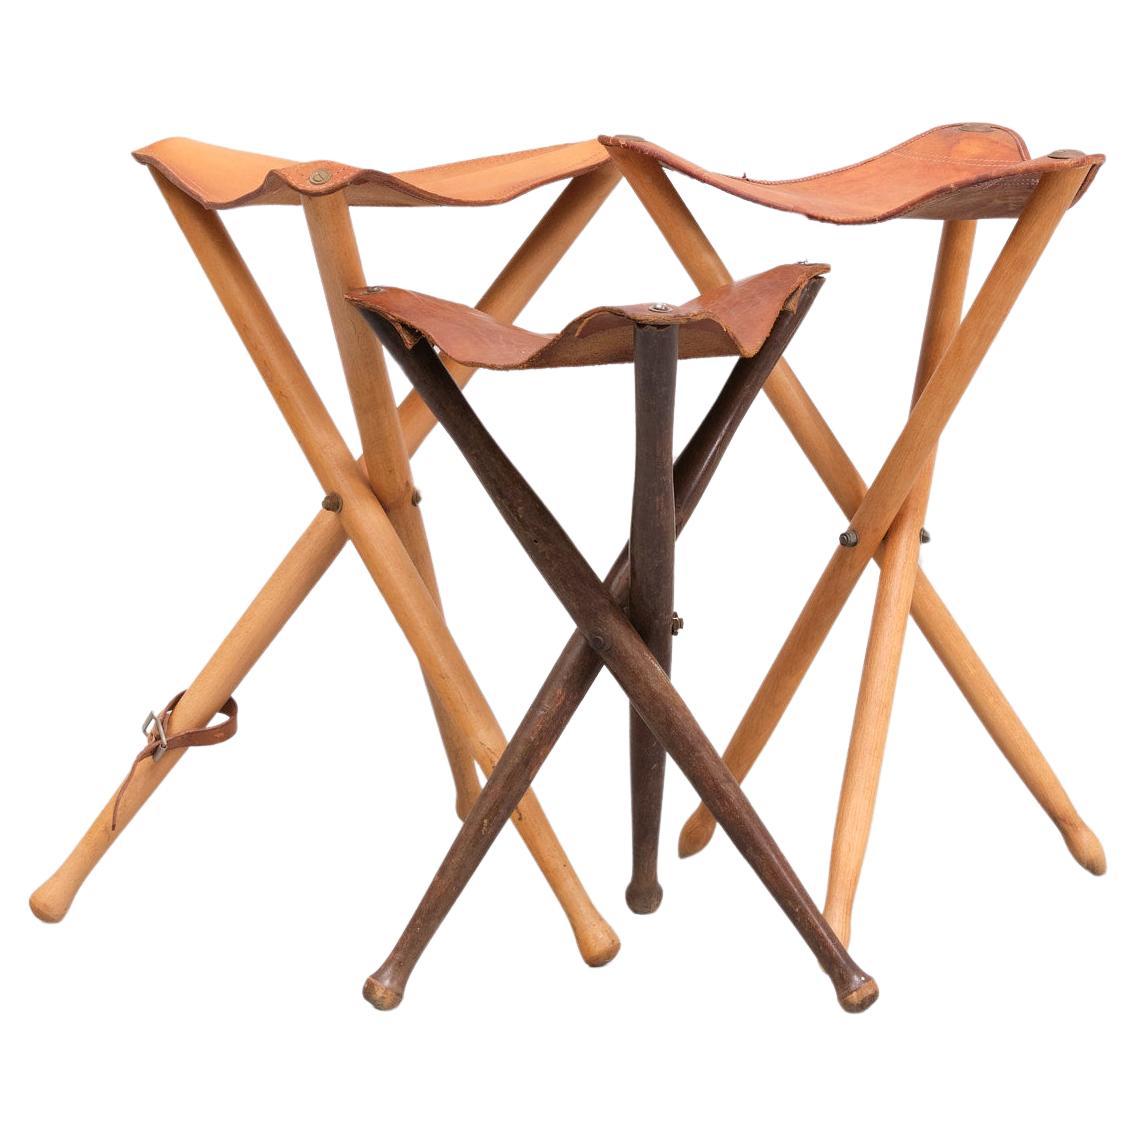 Three Vintage Scandinavian Tripod hunting stools with legs made of solid lacquered beech and Ash wood and a seat of thick tanned saddle leather. all slightly different.  Manufactured in the 1960s  